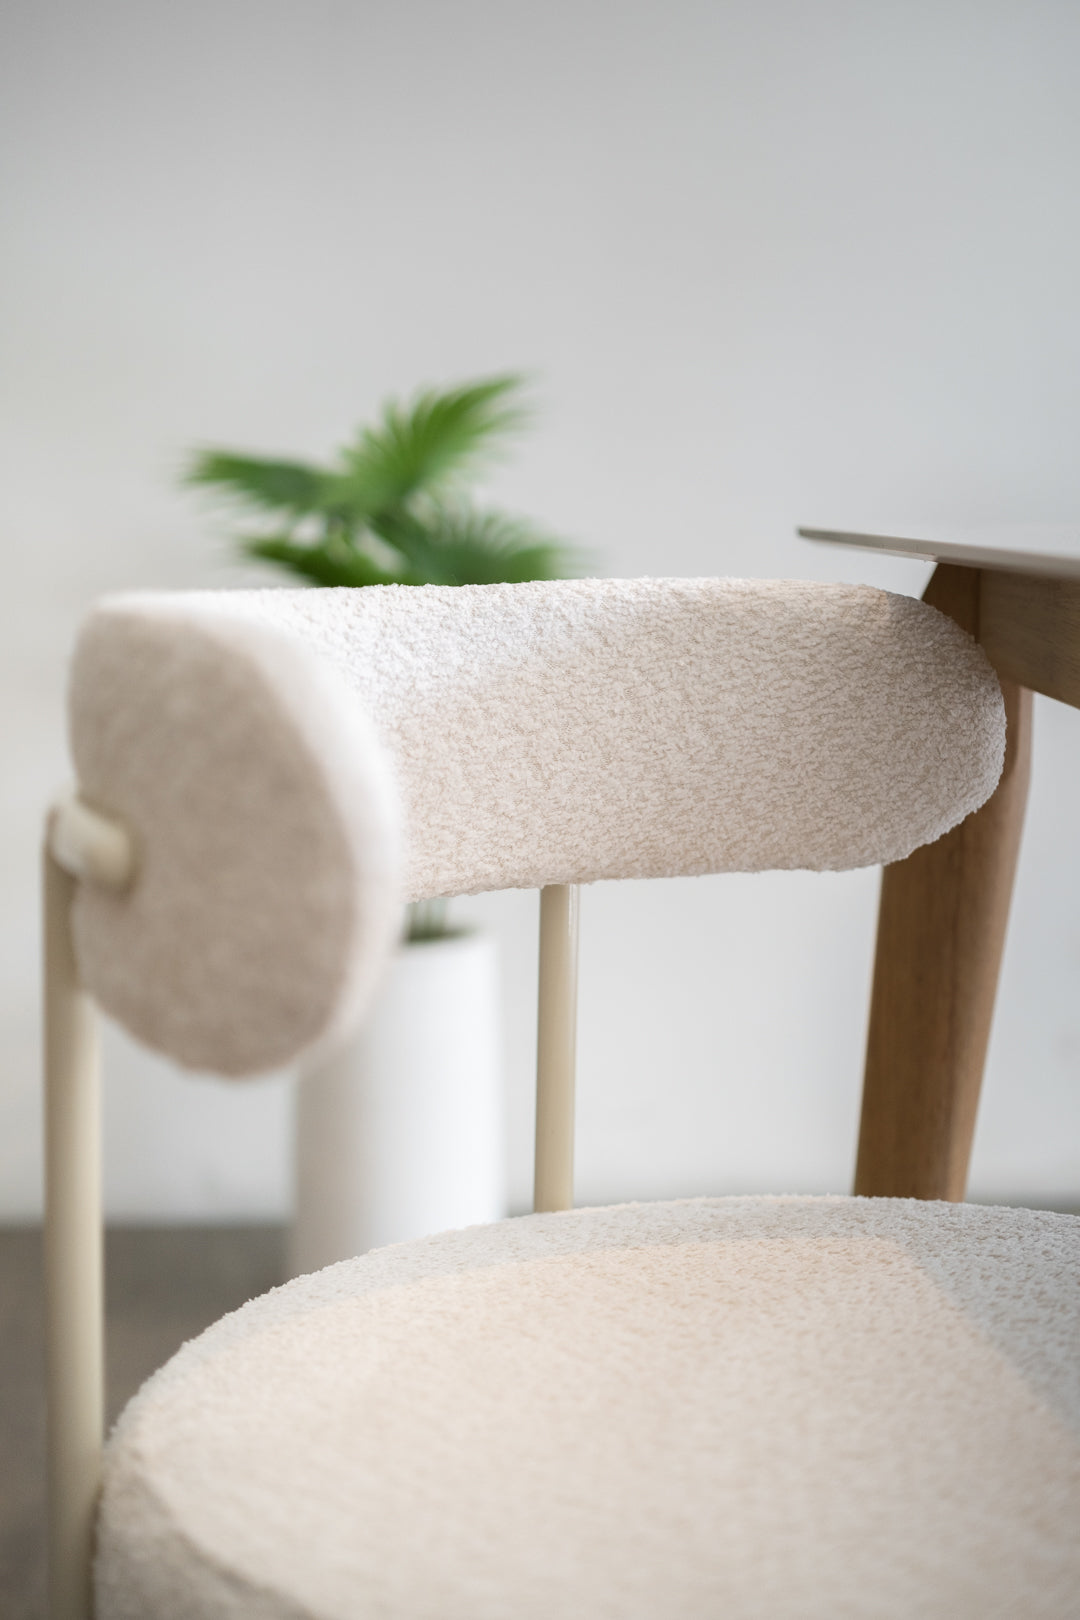 Wewo Dining Chair